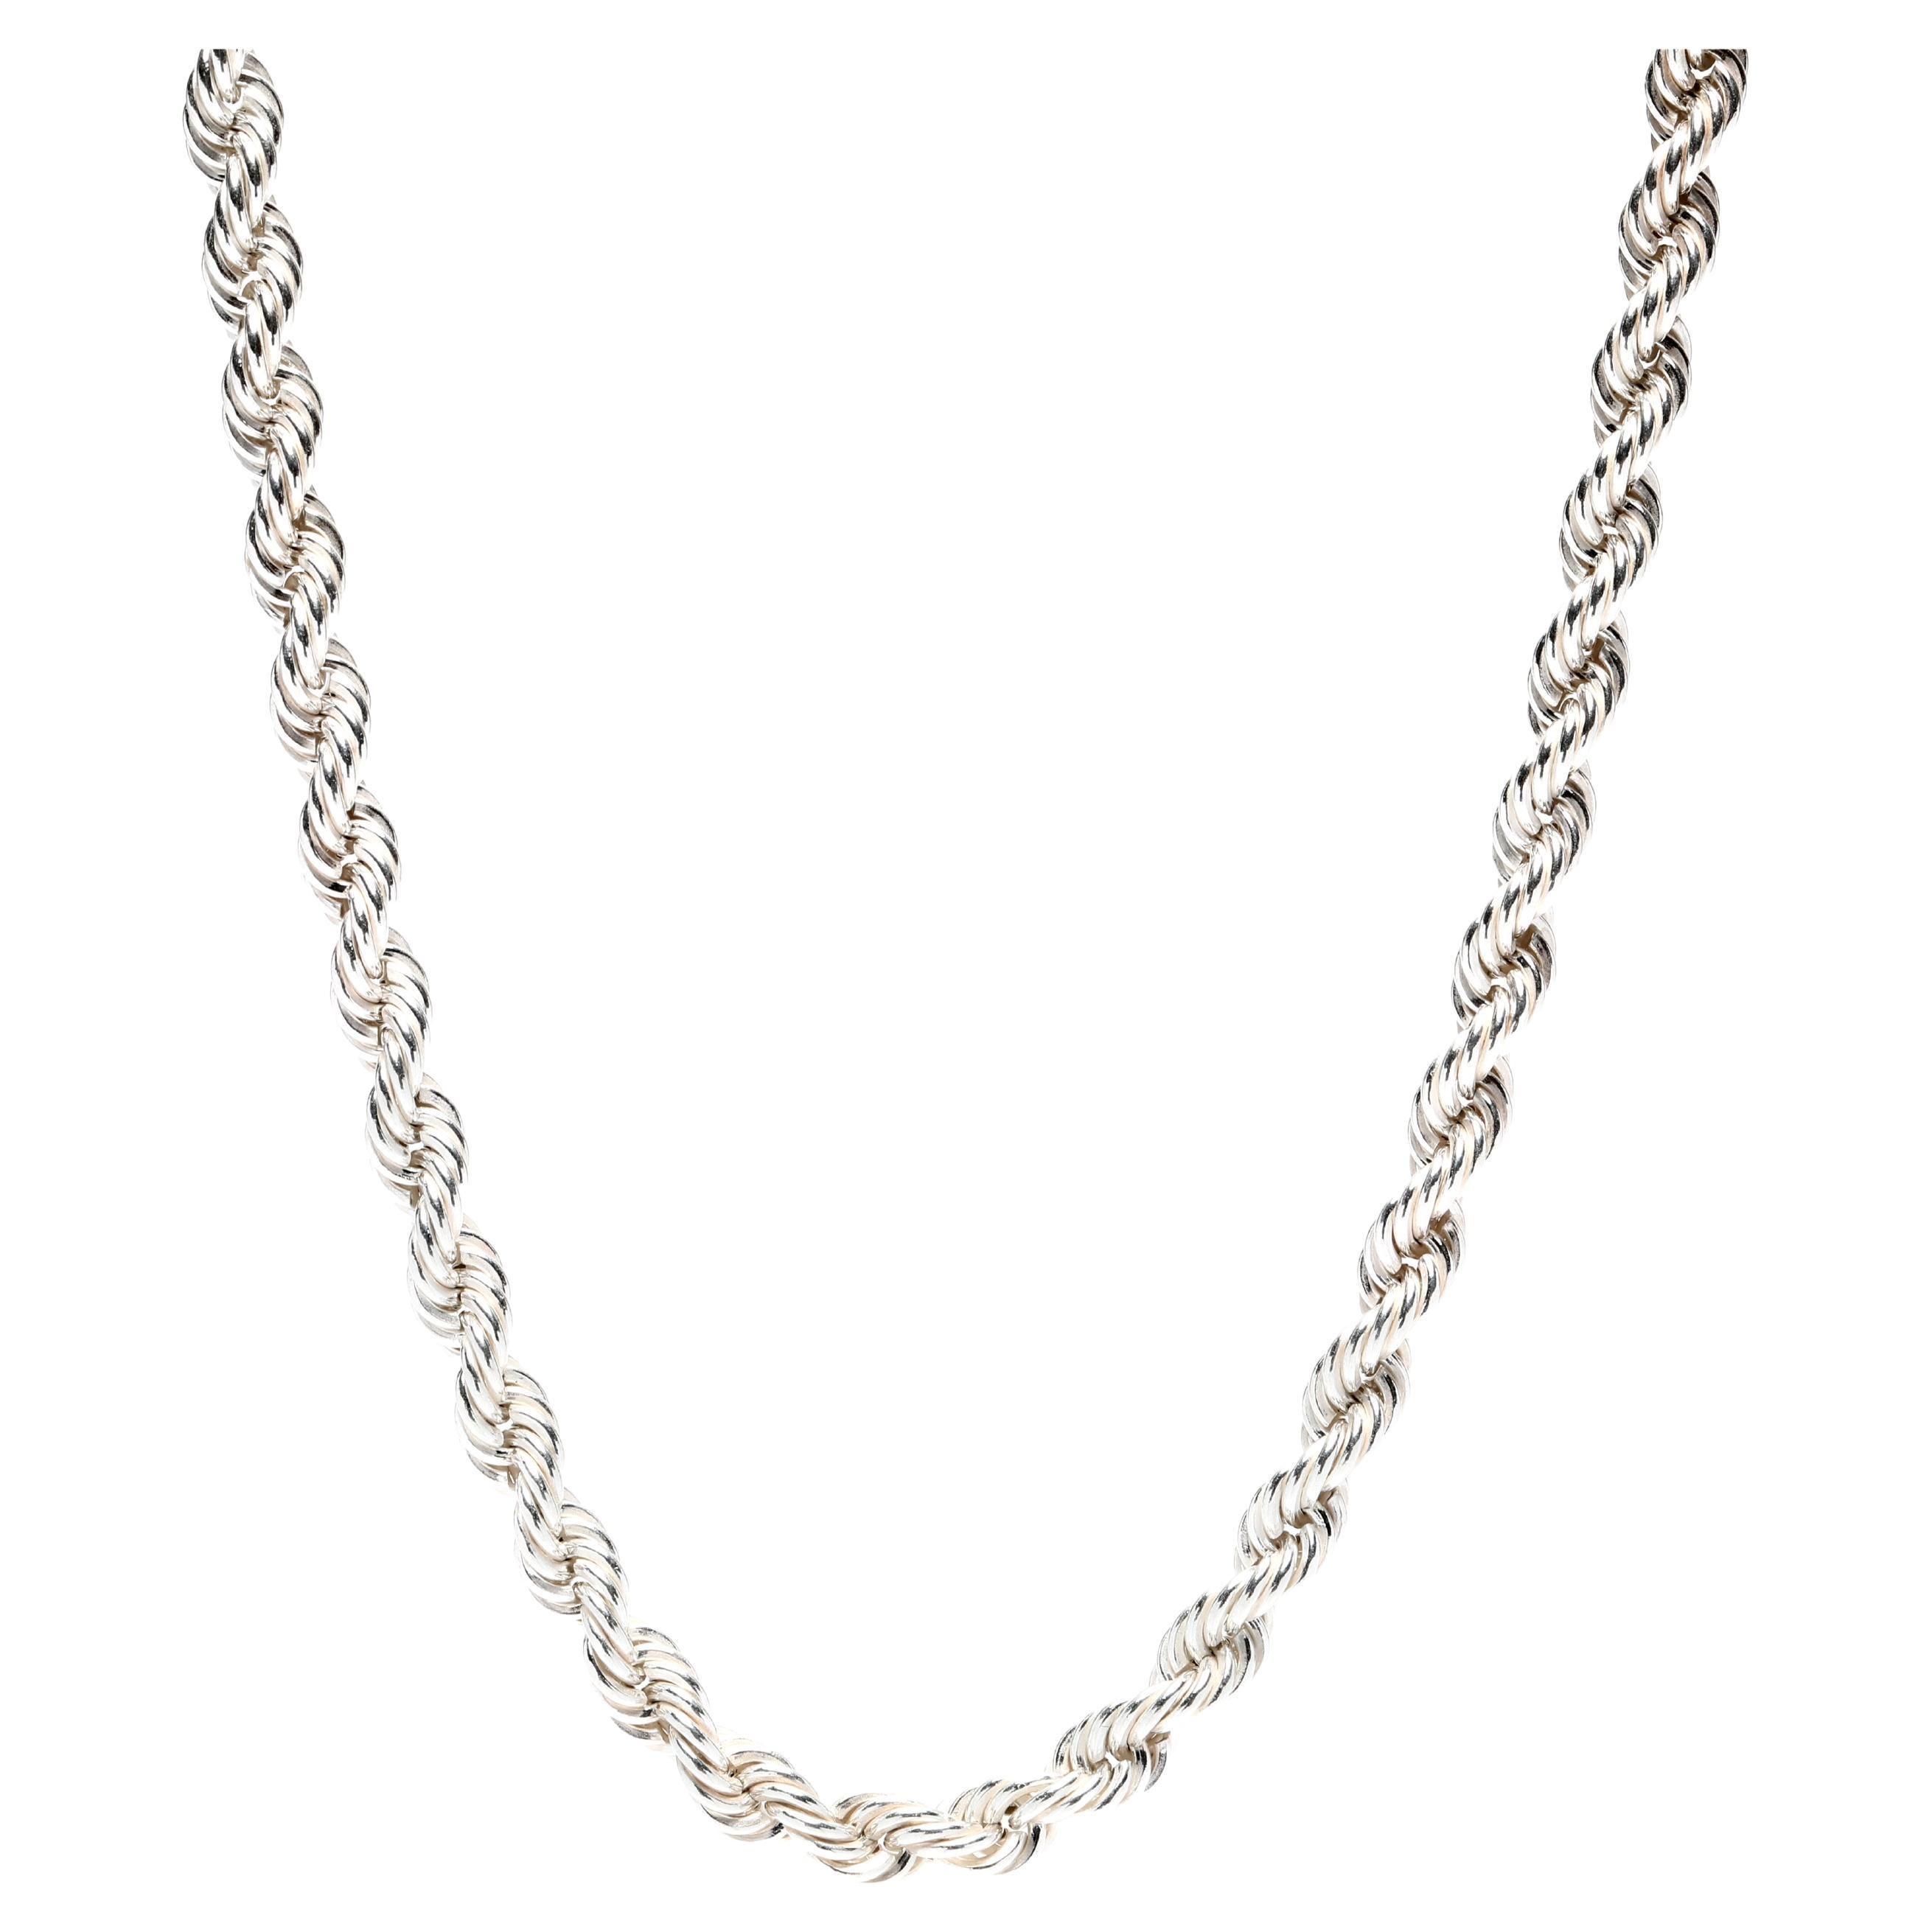 Thick Rope Chain Necklace, Rhodium Plated Sterling Silver